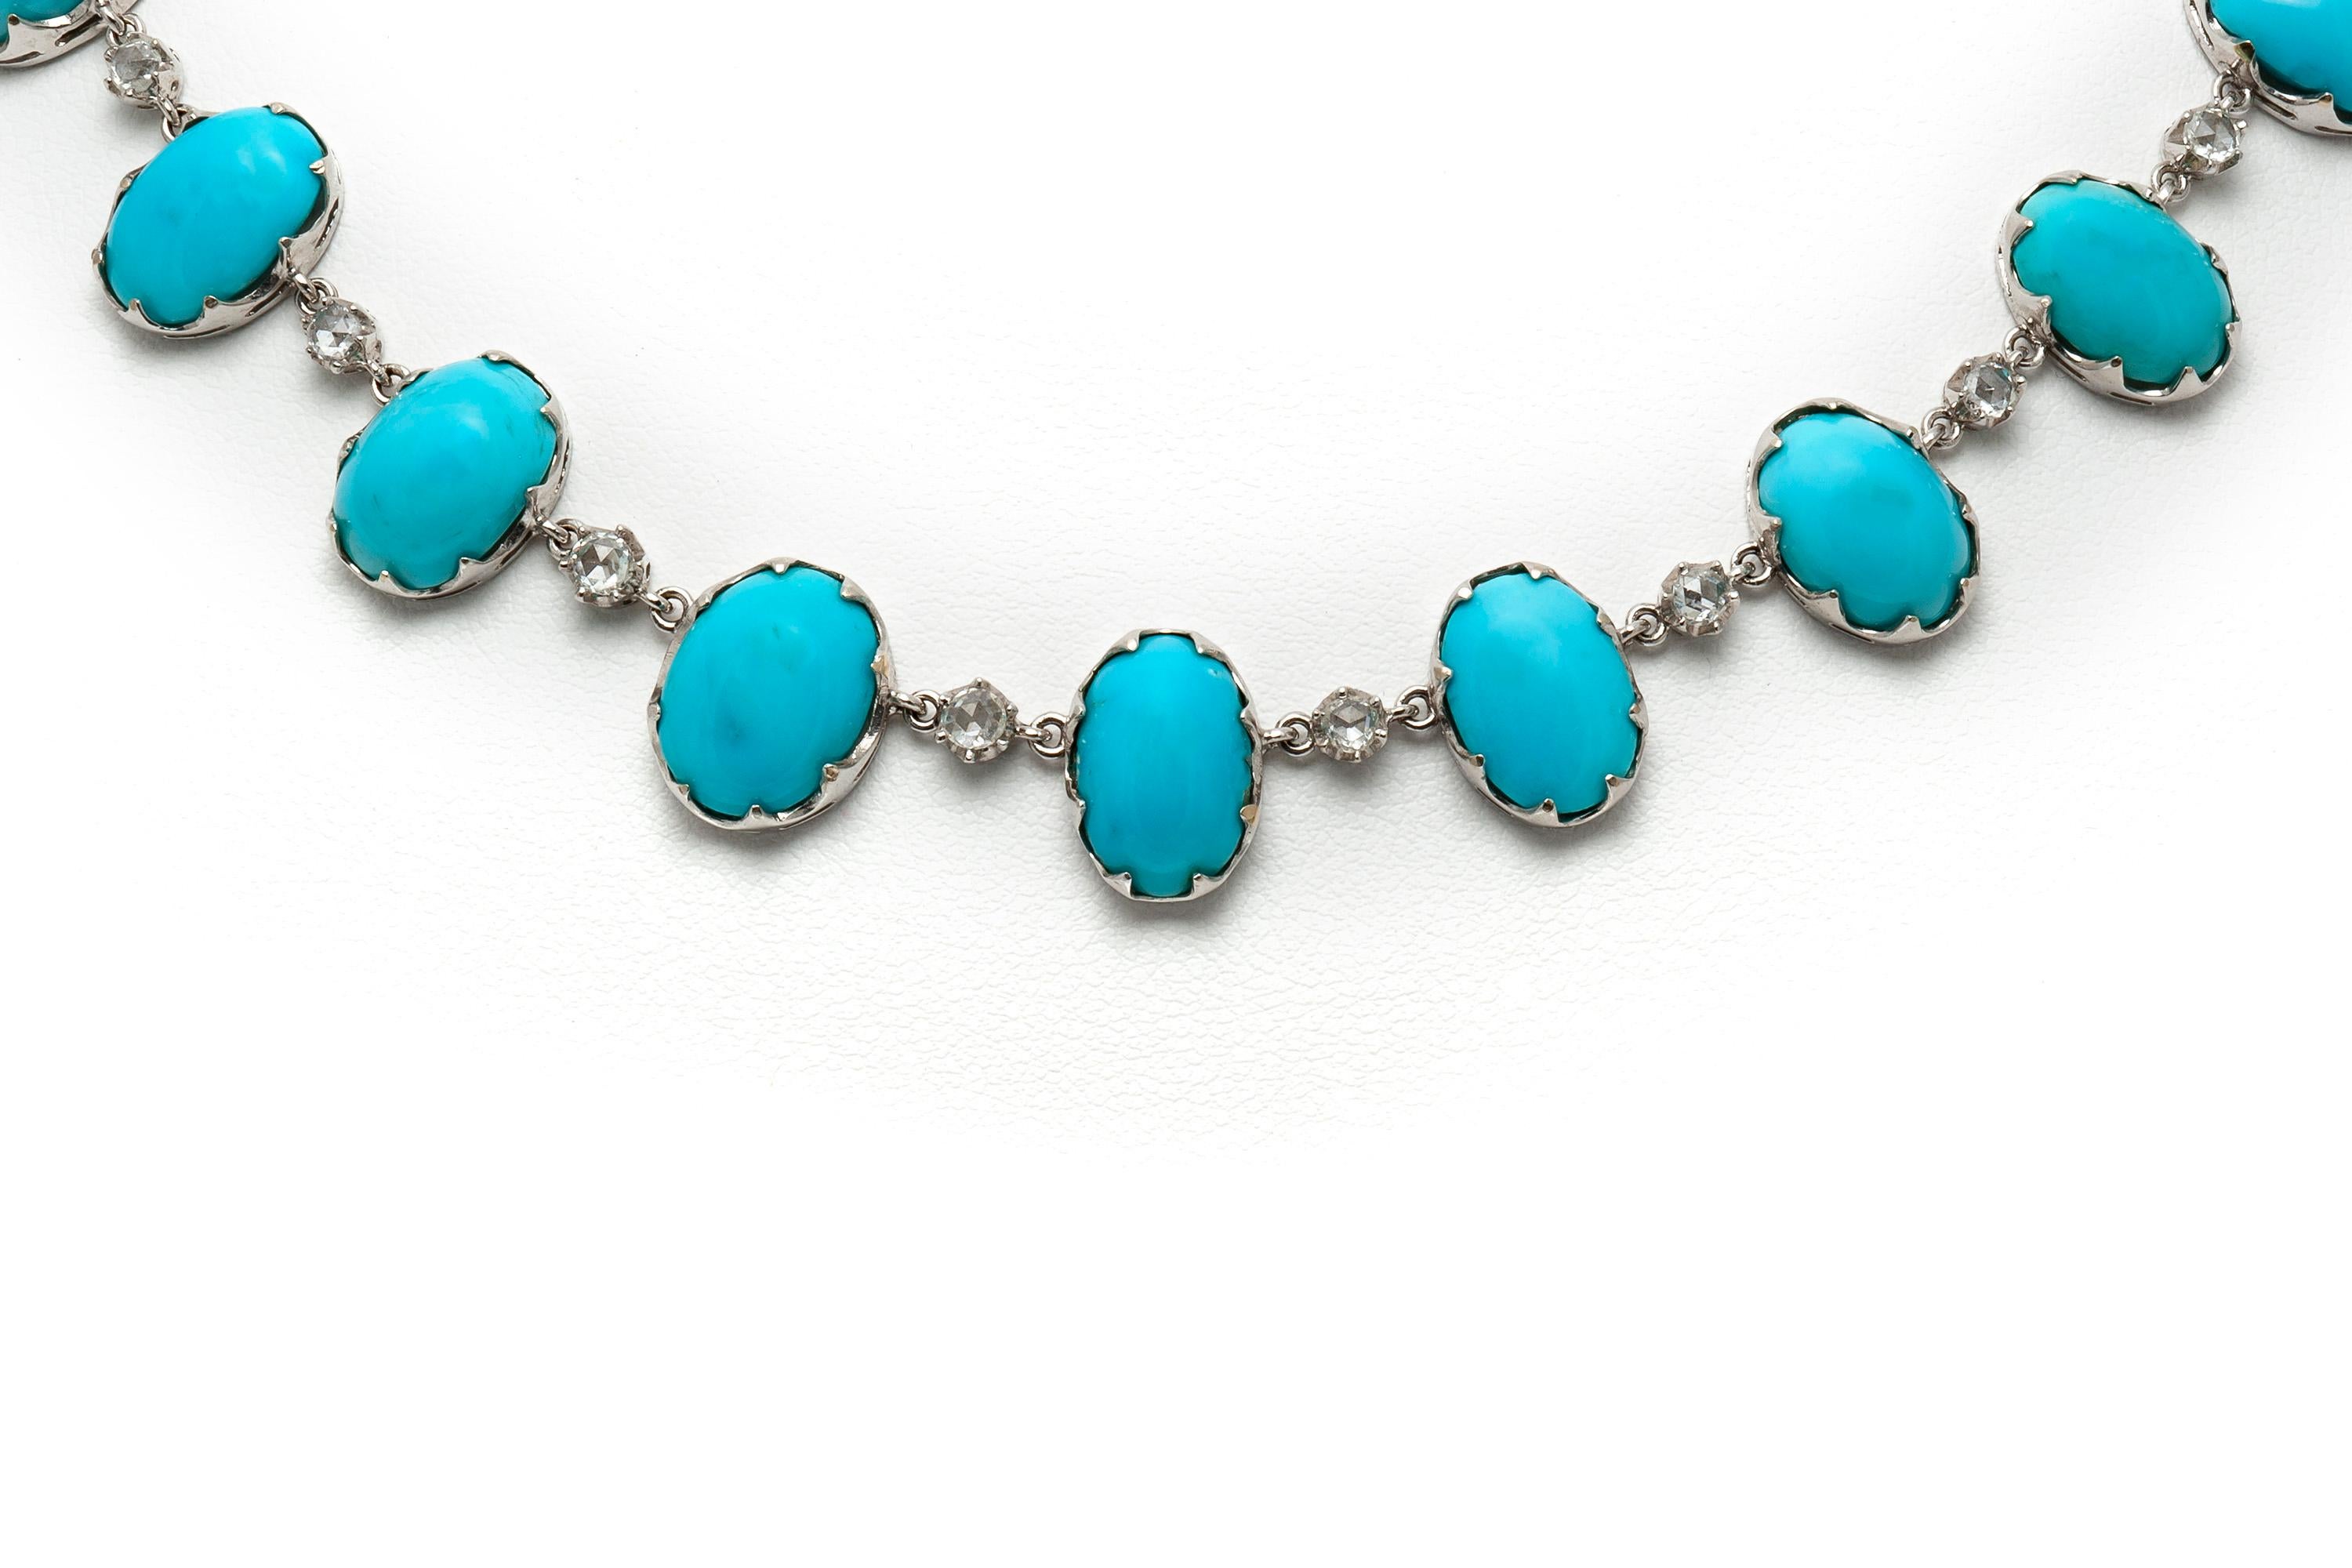 Necklace, finely crafted in 18k white gold with turquoise weighing approximately a total of 613.27 and diamonds weighing approximately a total of 1.82 carats.